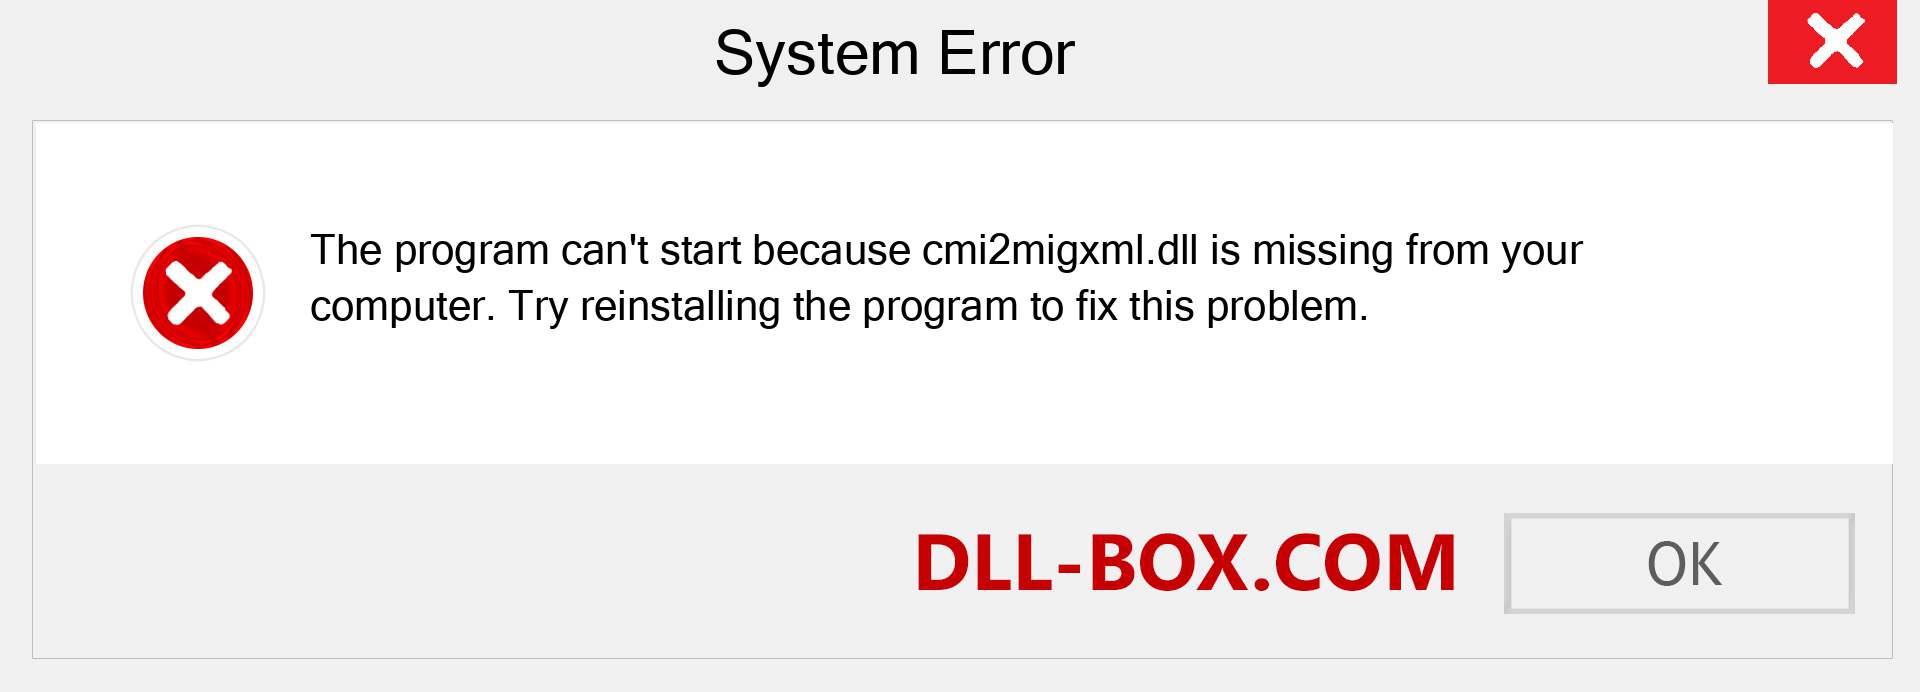  cmi2migxml.dll file is missing?. Download for Windows 7, 8, 10 - Fix  cmi2migxml dll Missing Error on Windows, photos, images